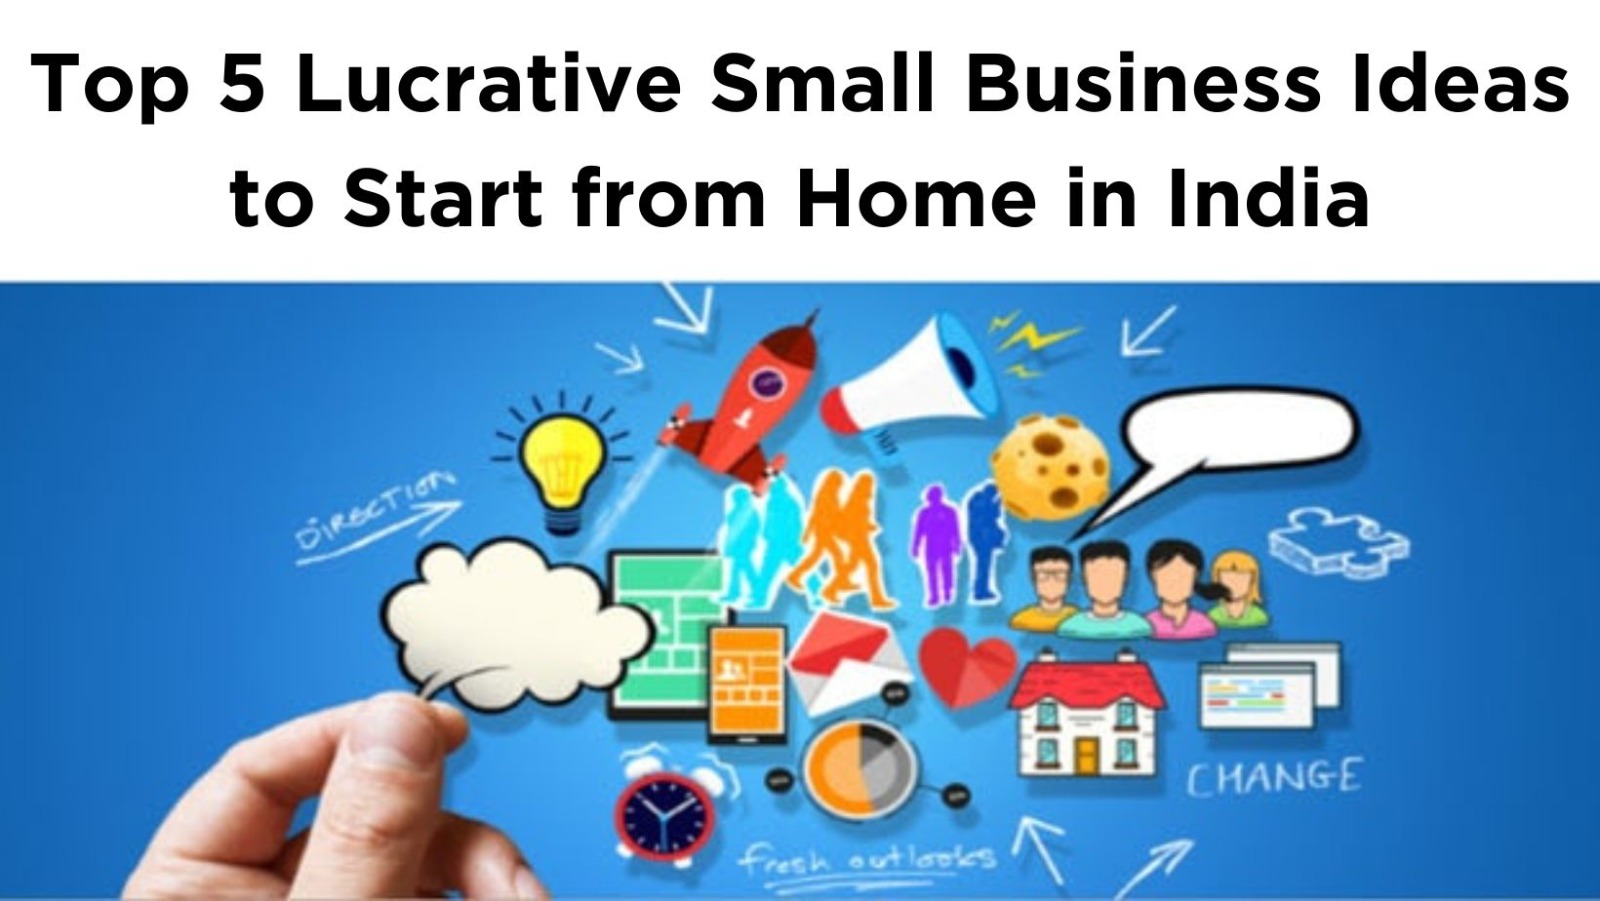 Top 5 Lucrative Small Business Ideas to Start from Home in India